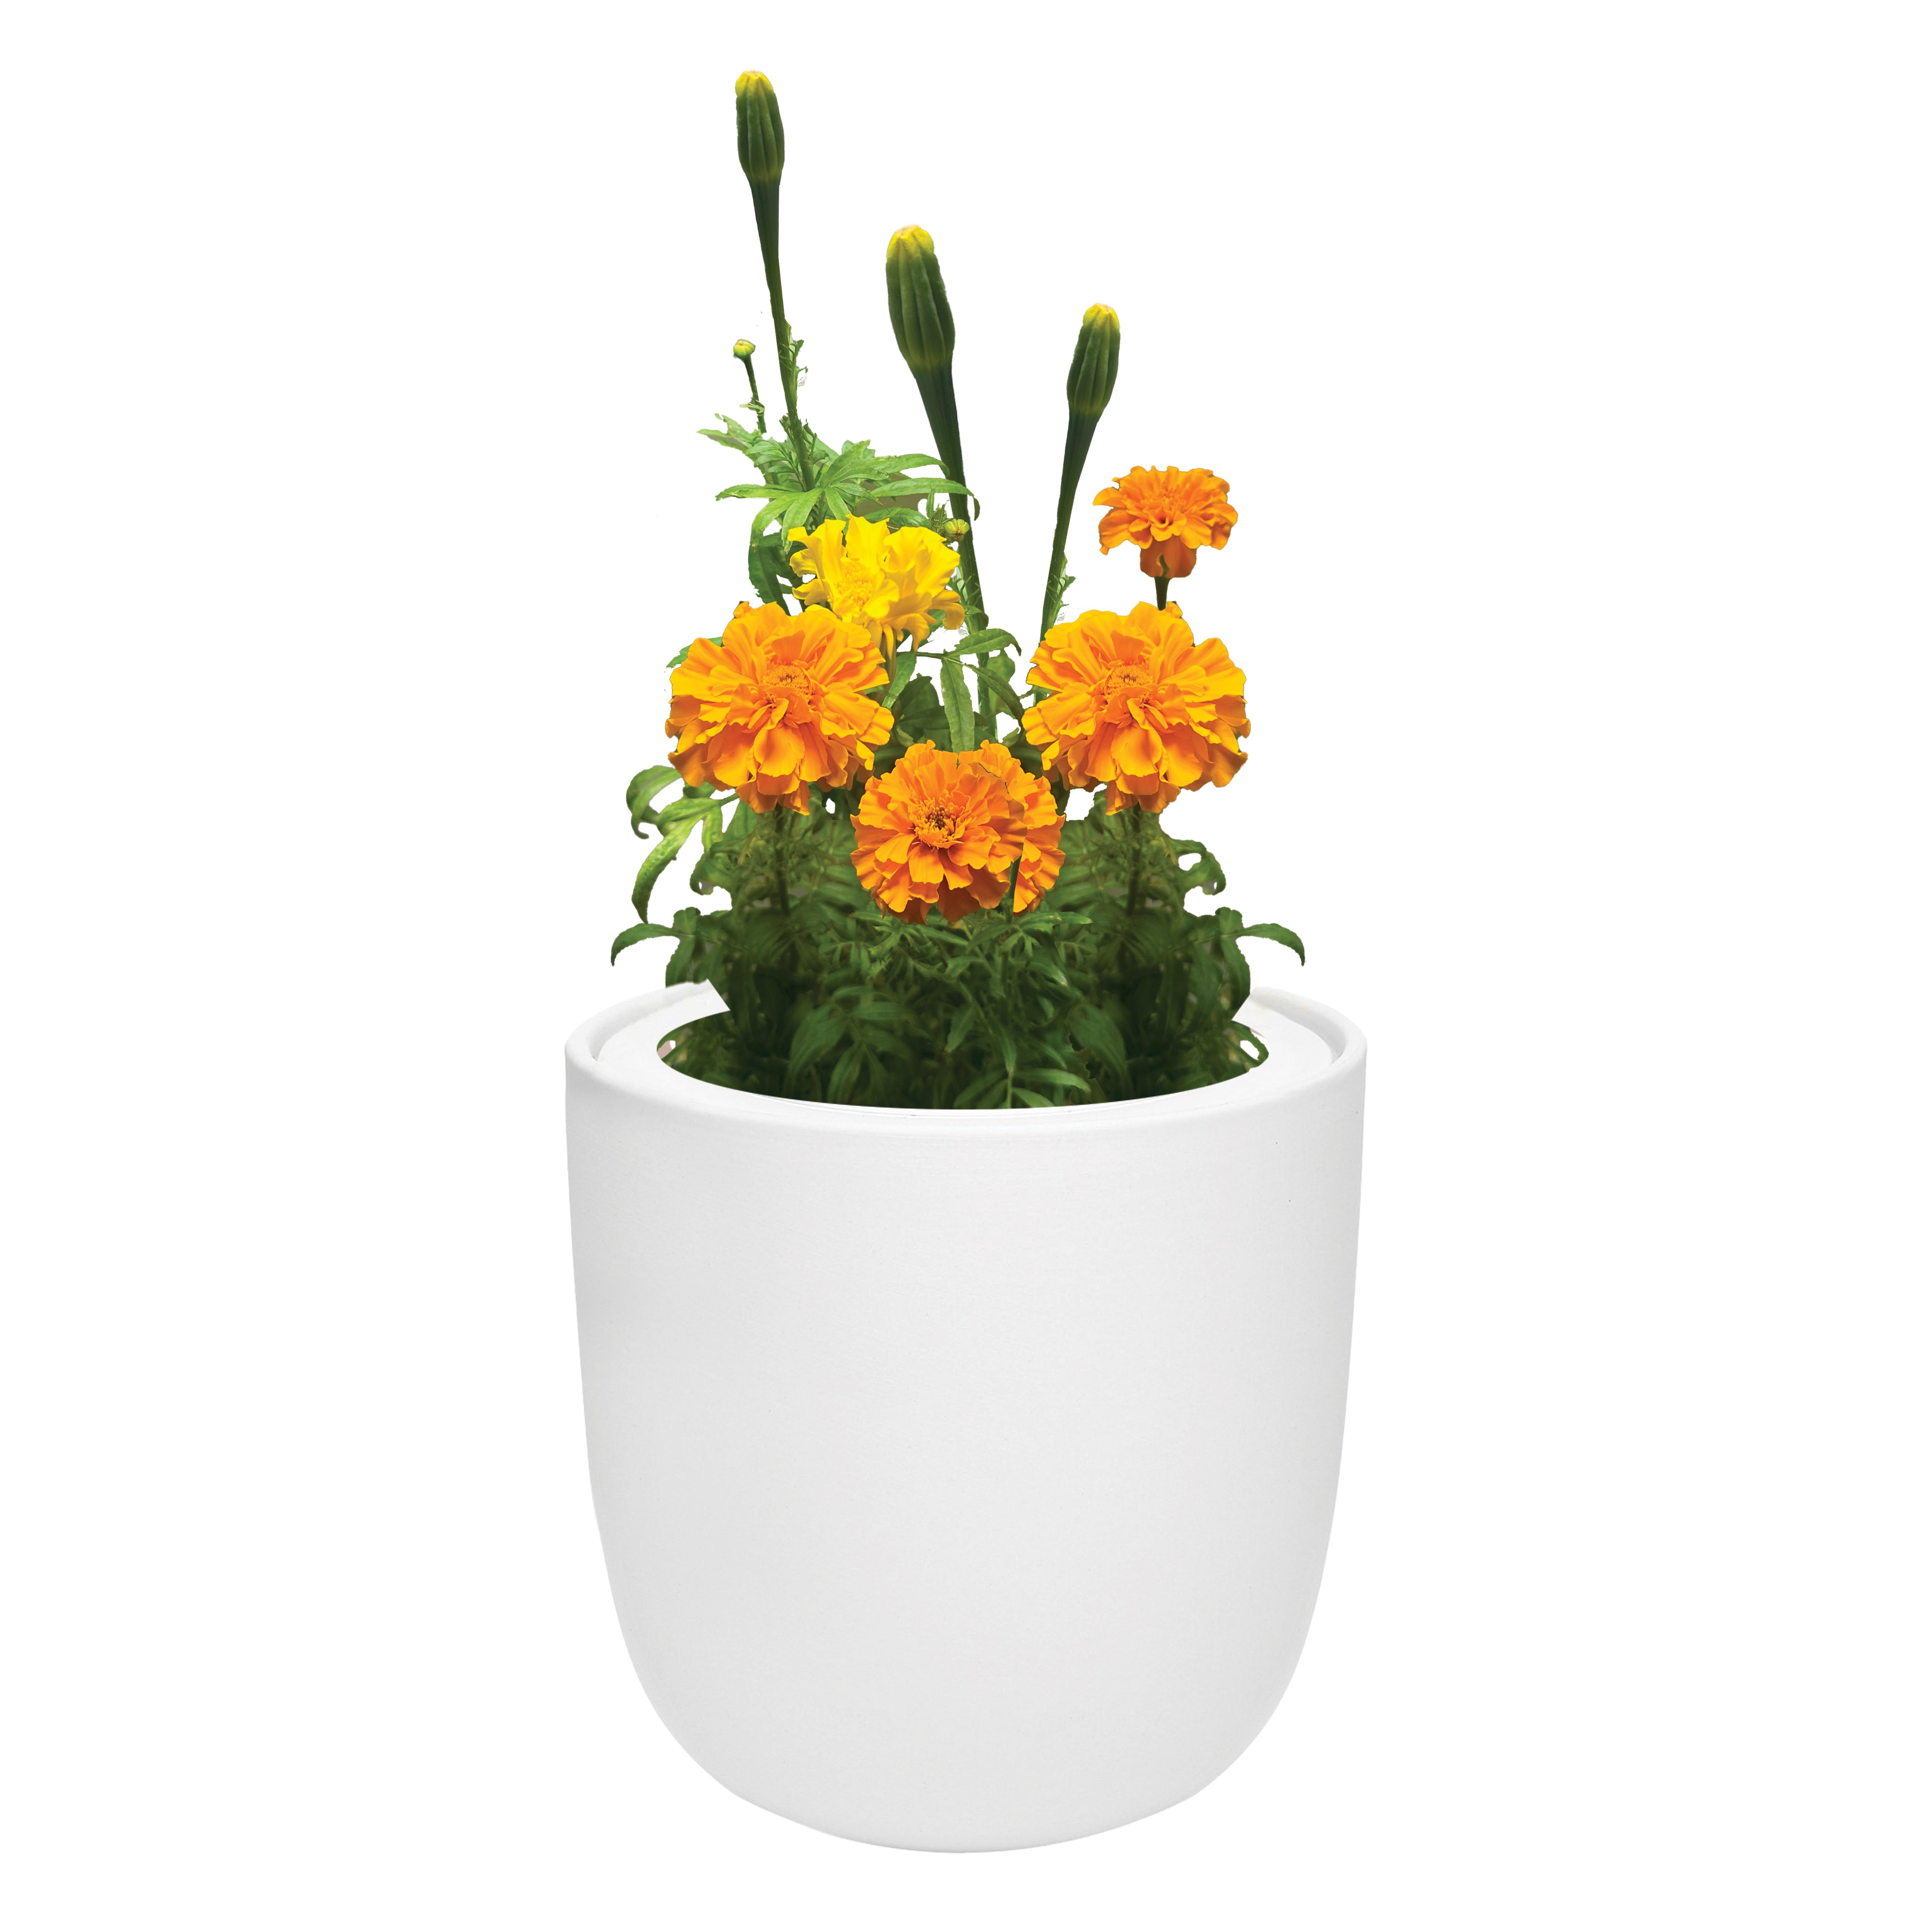 Environet Hydroponic Marigold Growing Kit with White Ceramic Pot and Seeds